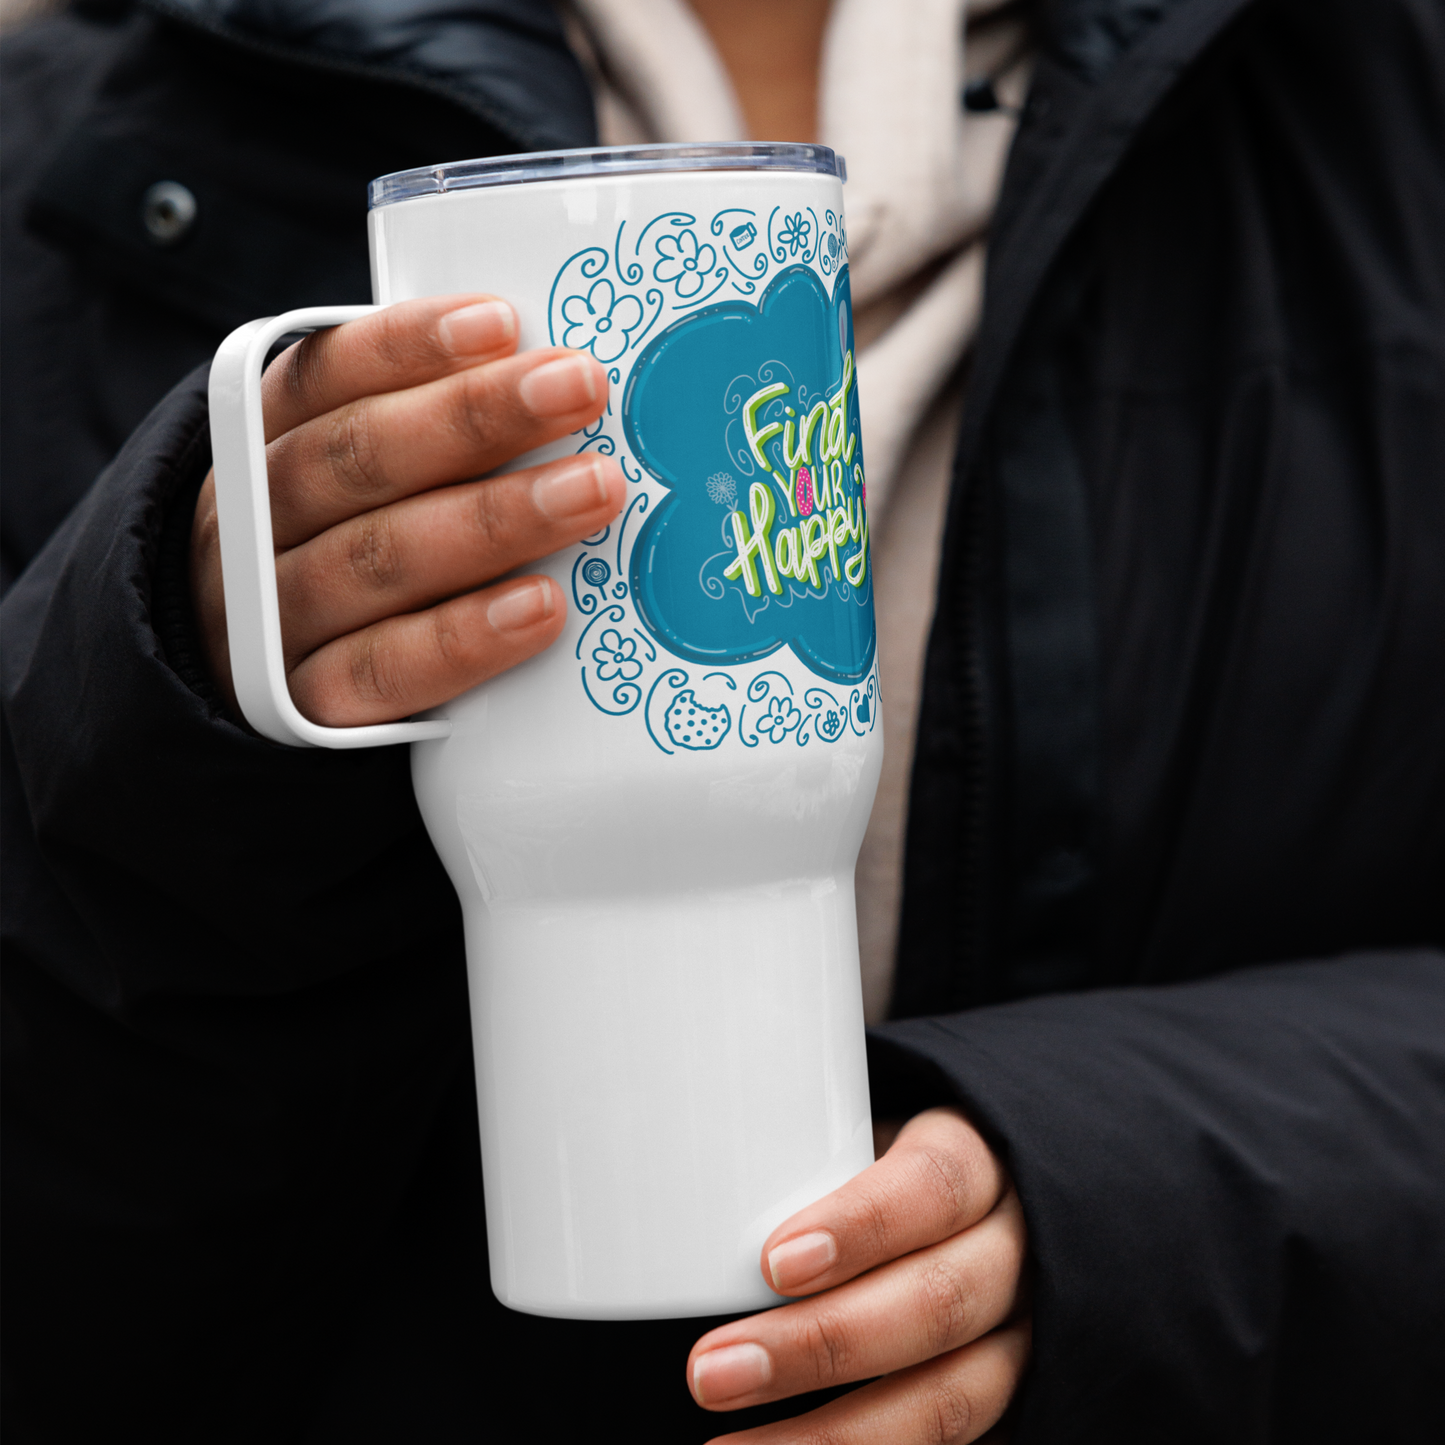 Find Your Happy Travel mug | Tumbler with a Handle | 25 oz | FREE SHIPPING